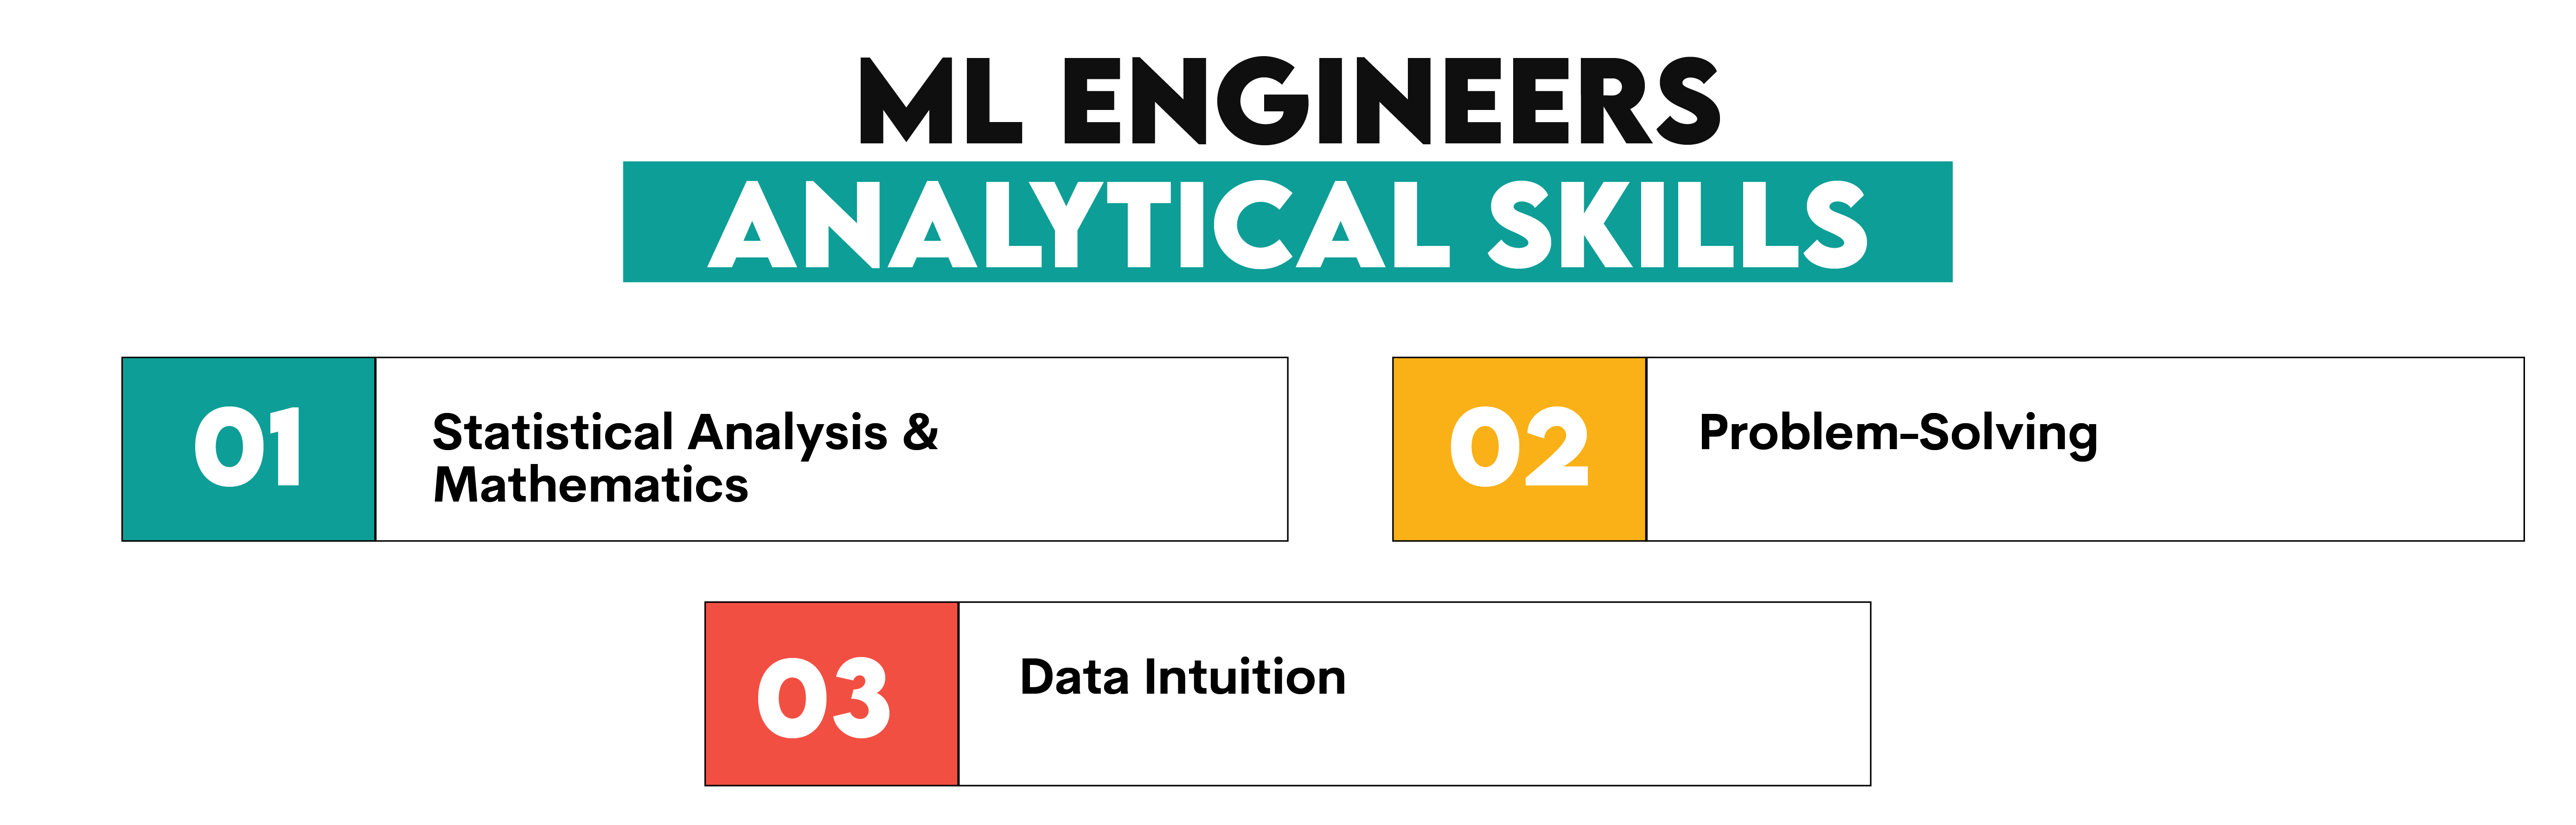 Analytical Skills Required to Become a Machine Learning Engineer